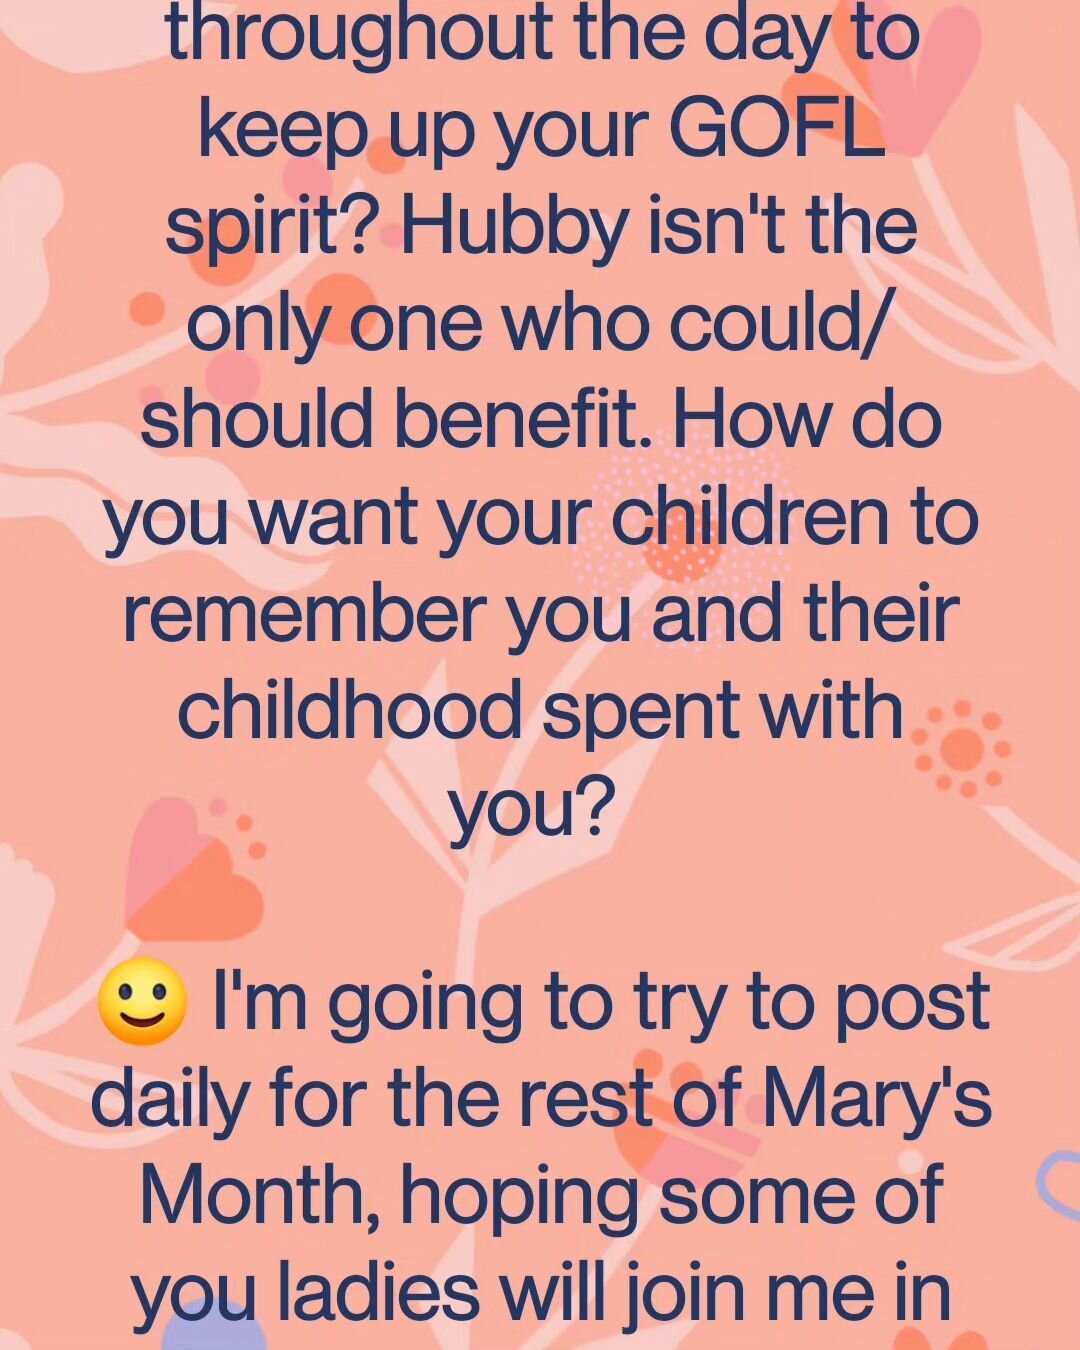 Posted in the SCW group: //What are you doing throughout the day to keep up your GOFL spirit? Hubby isn't the only one who could/should benefit. How do you want your children to remember you and their childhood spent with you? 

:) I'm going to try t